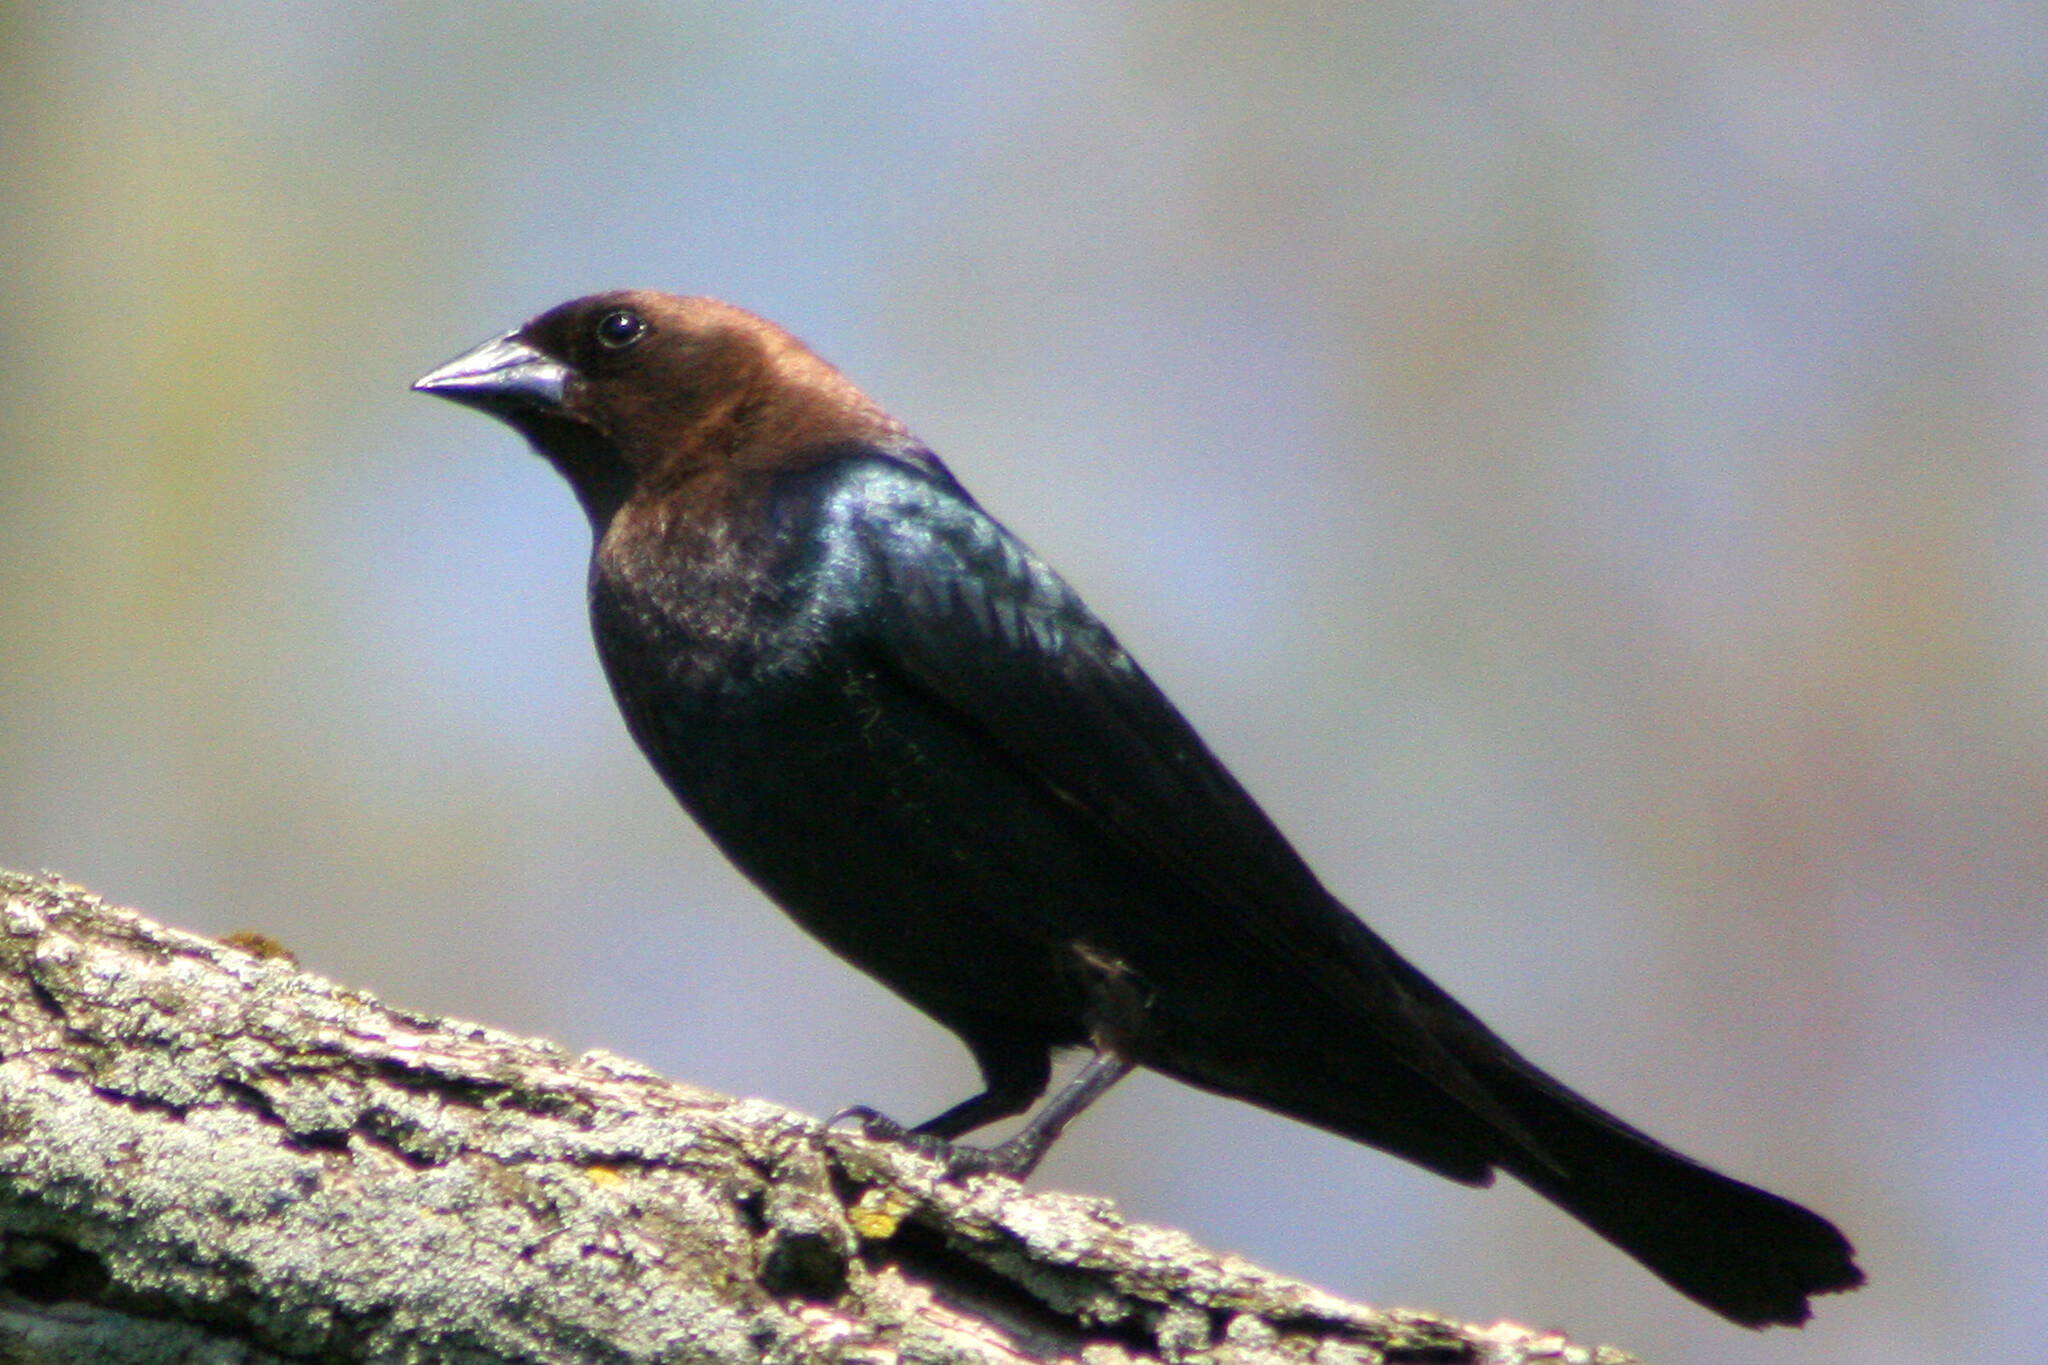 This photo shows a brown-headed cowbird. Adult brown-headed cowbirds in North America practice brood parasitism in which they remove eggs from a host nest and replace them with eggs of their own. (Courtesy Photo / DonaldRMiller Photography, Wikimedia)